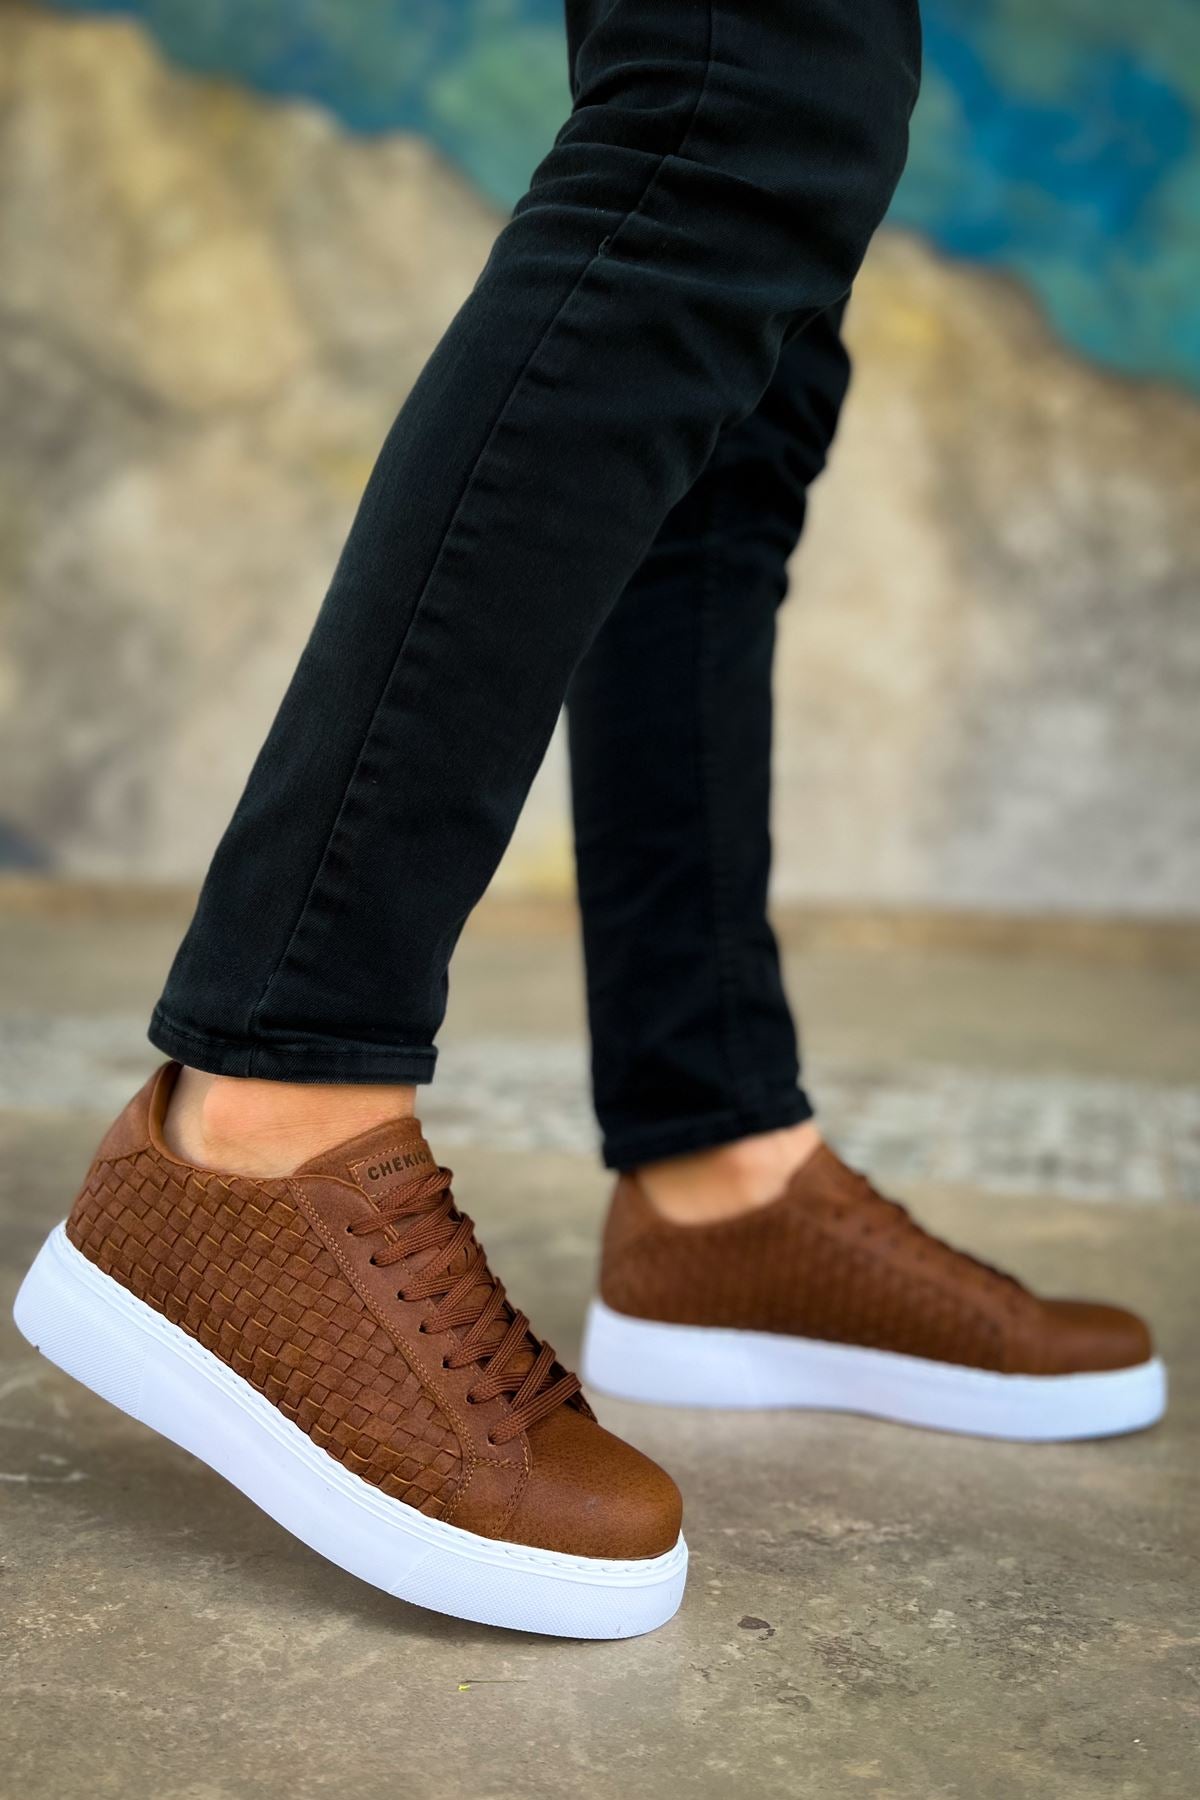 CH203 OBT Maglieria Men's sneakers Shoes Brown - STREETMODE ™